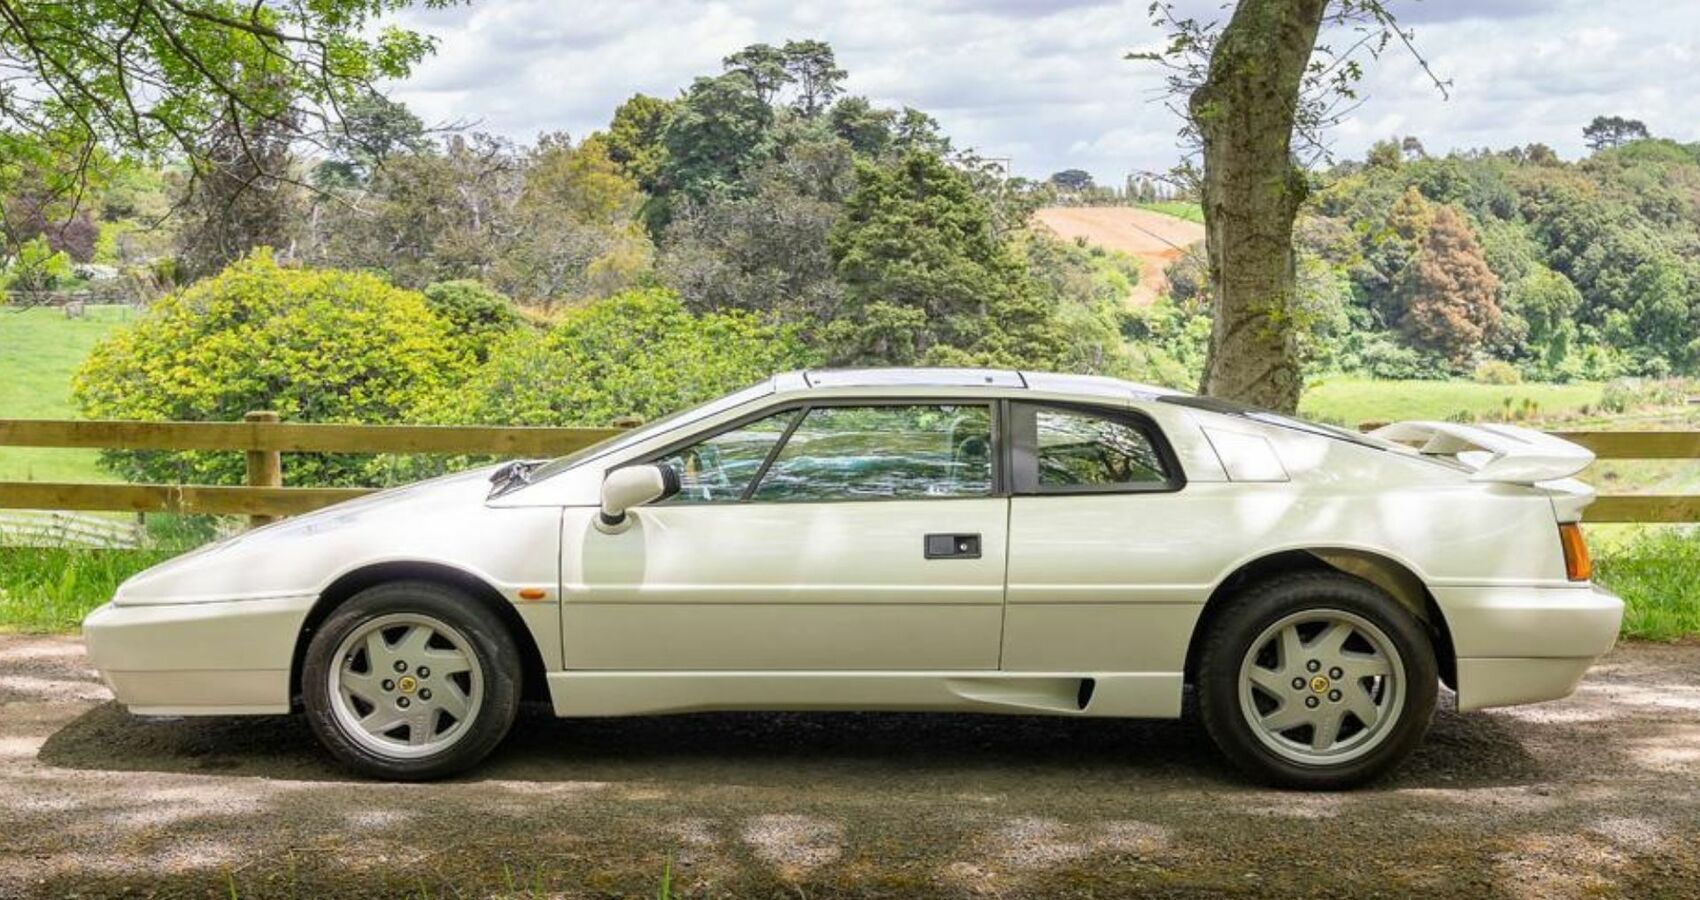 Let's Take A Look At The 1990 Lotus Esprit SE From 'Pretty Woman'